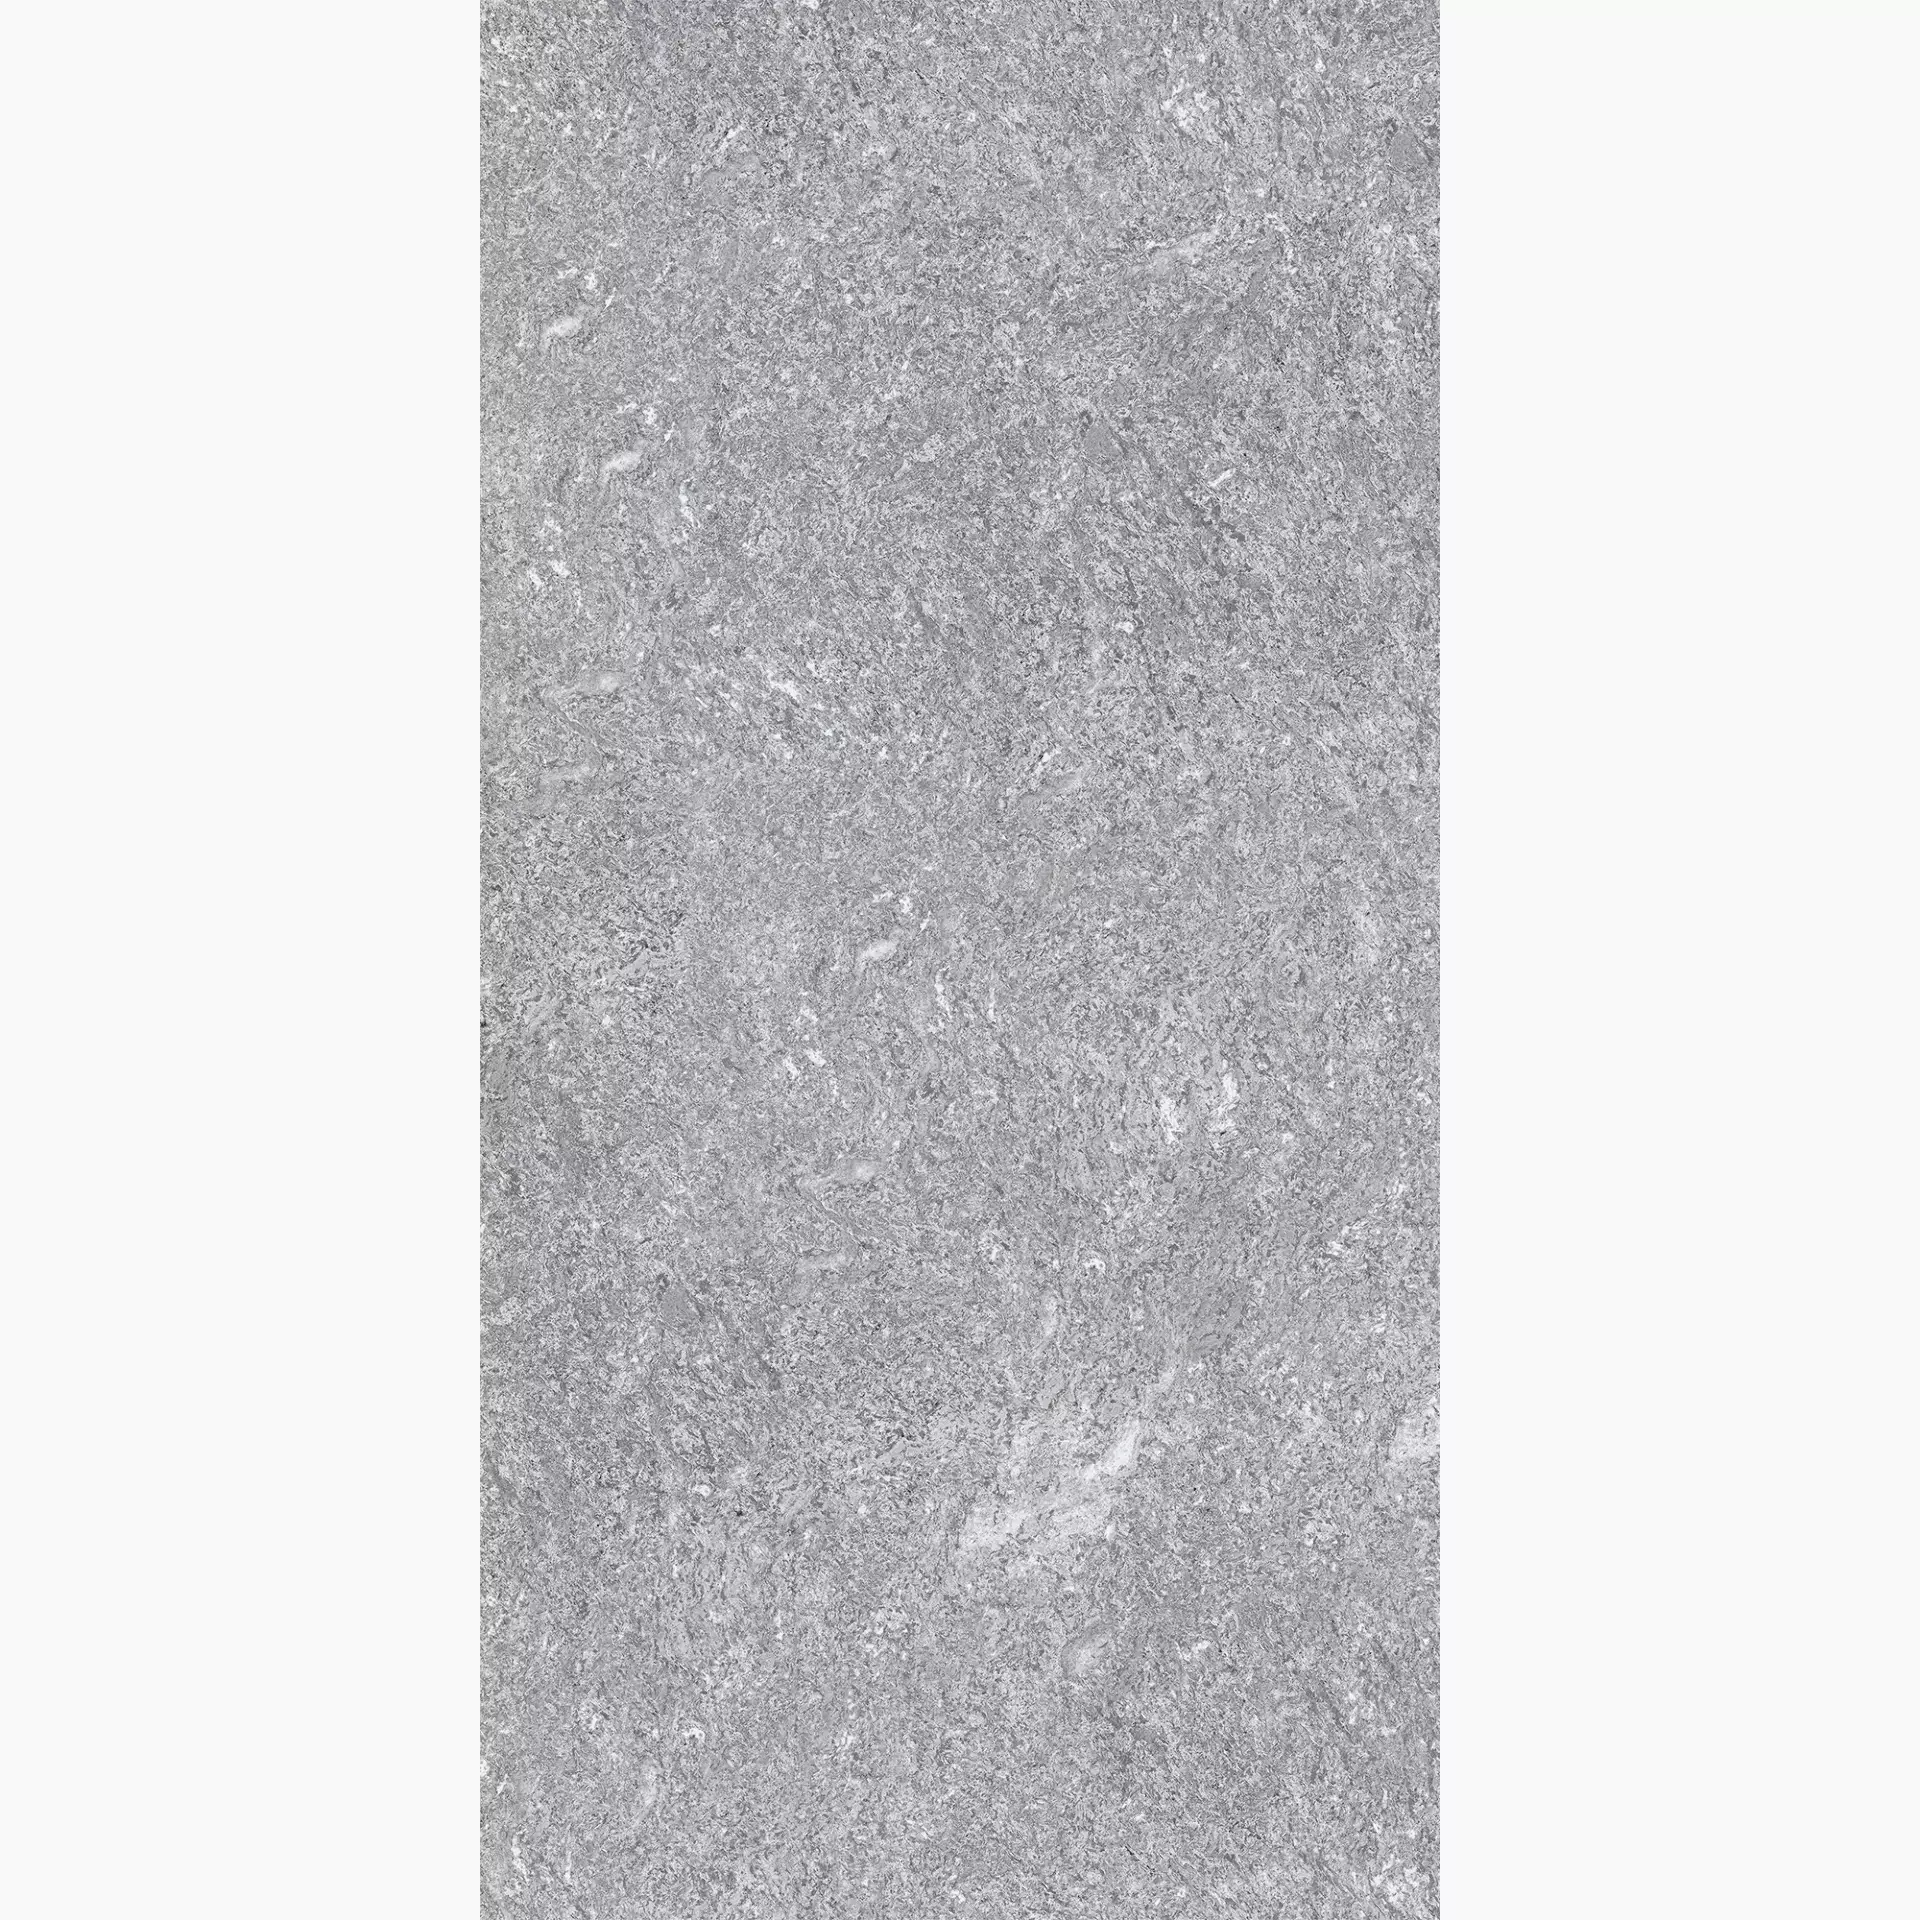 Caesar Shapes Of It Sestriere Naturale AFM4 60x120cm rectified 9mm